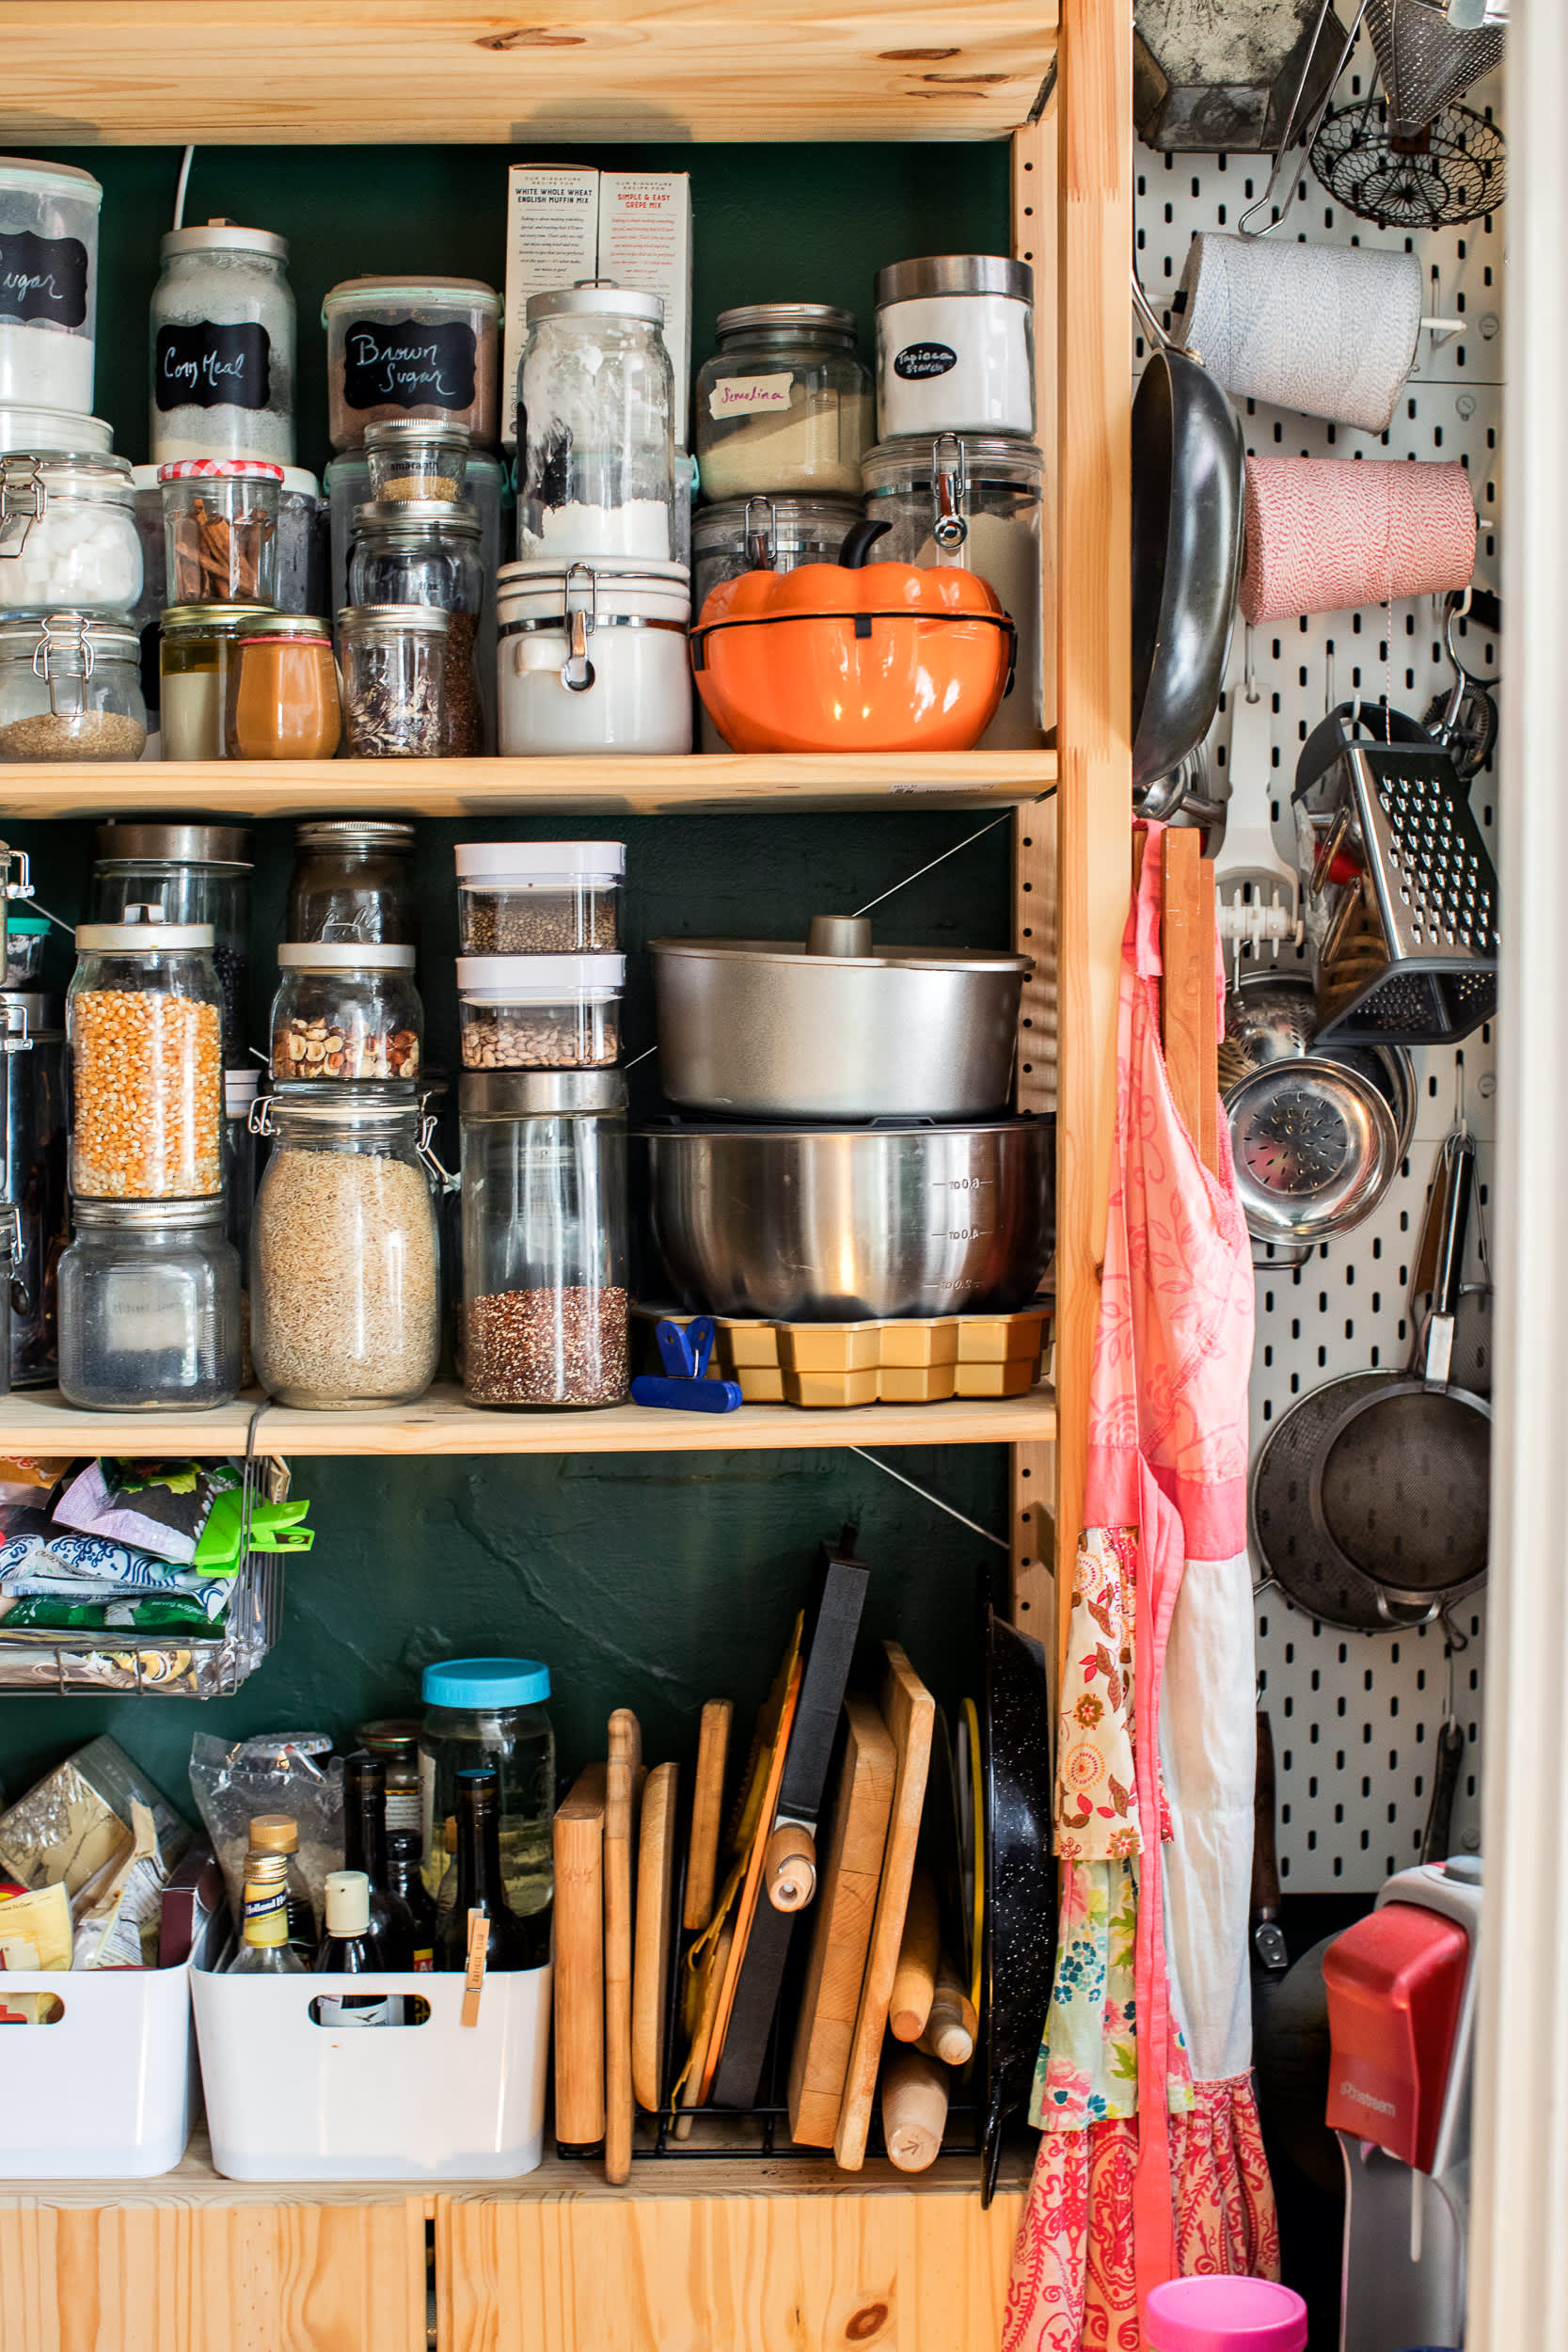 11 Food Storage Containers That Will Help You Achieve an Organized,  Streamlined Refrigerator